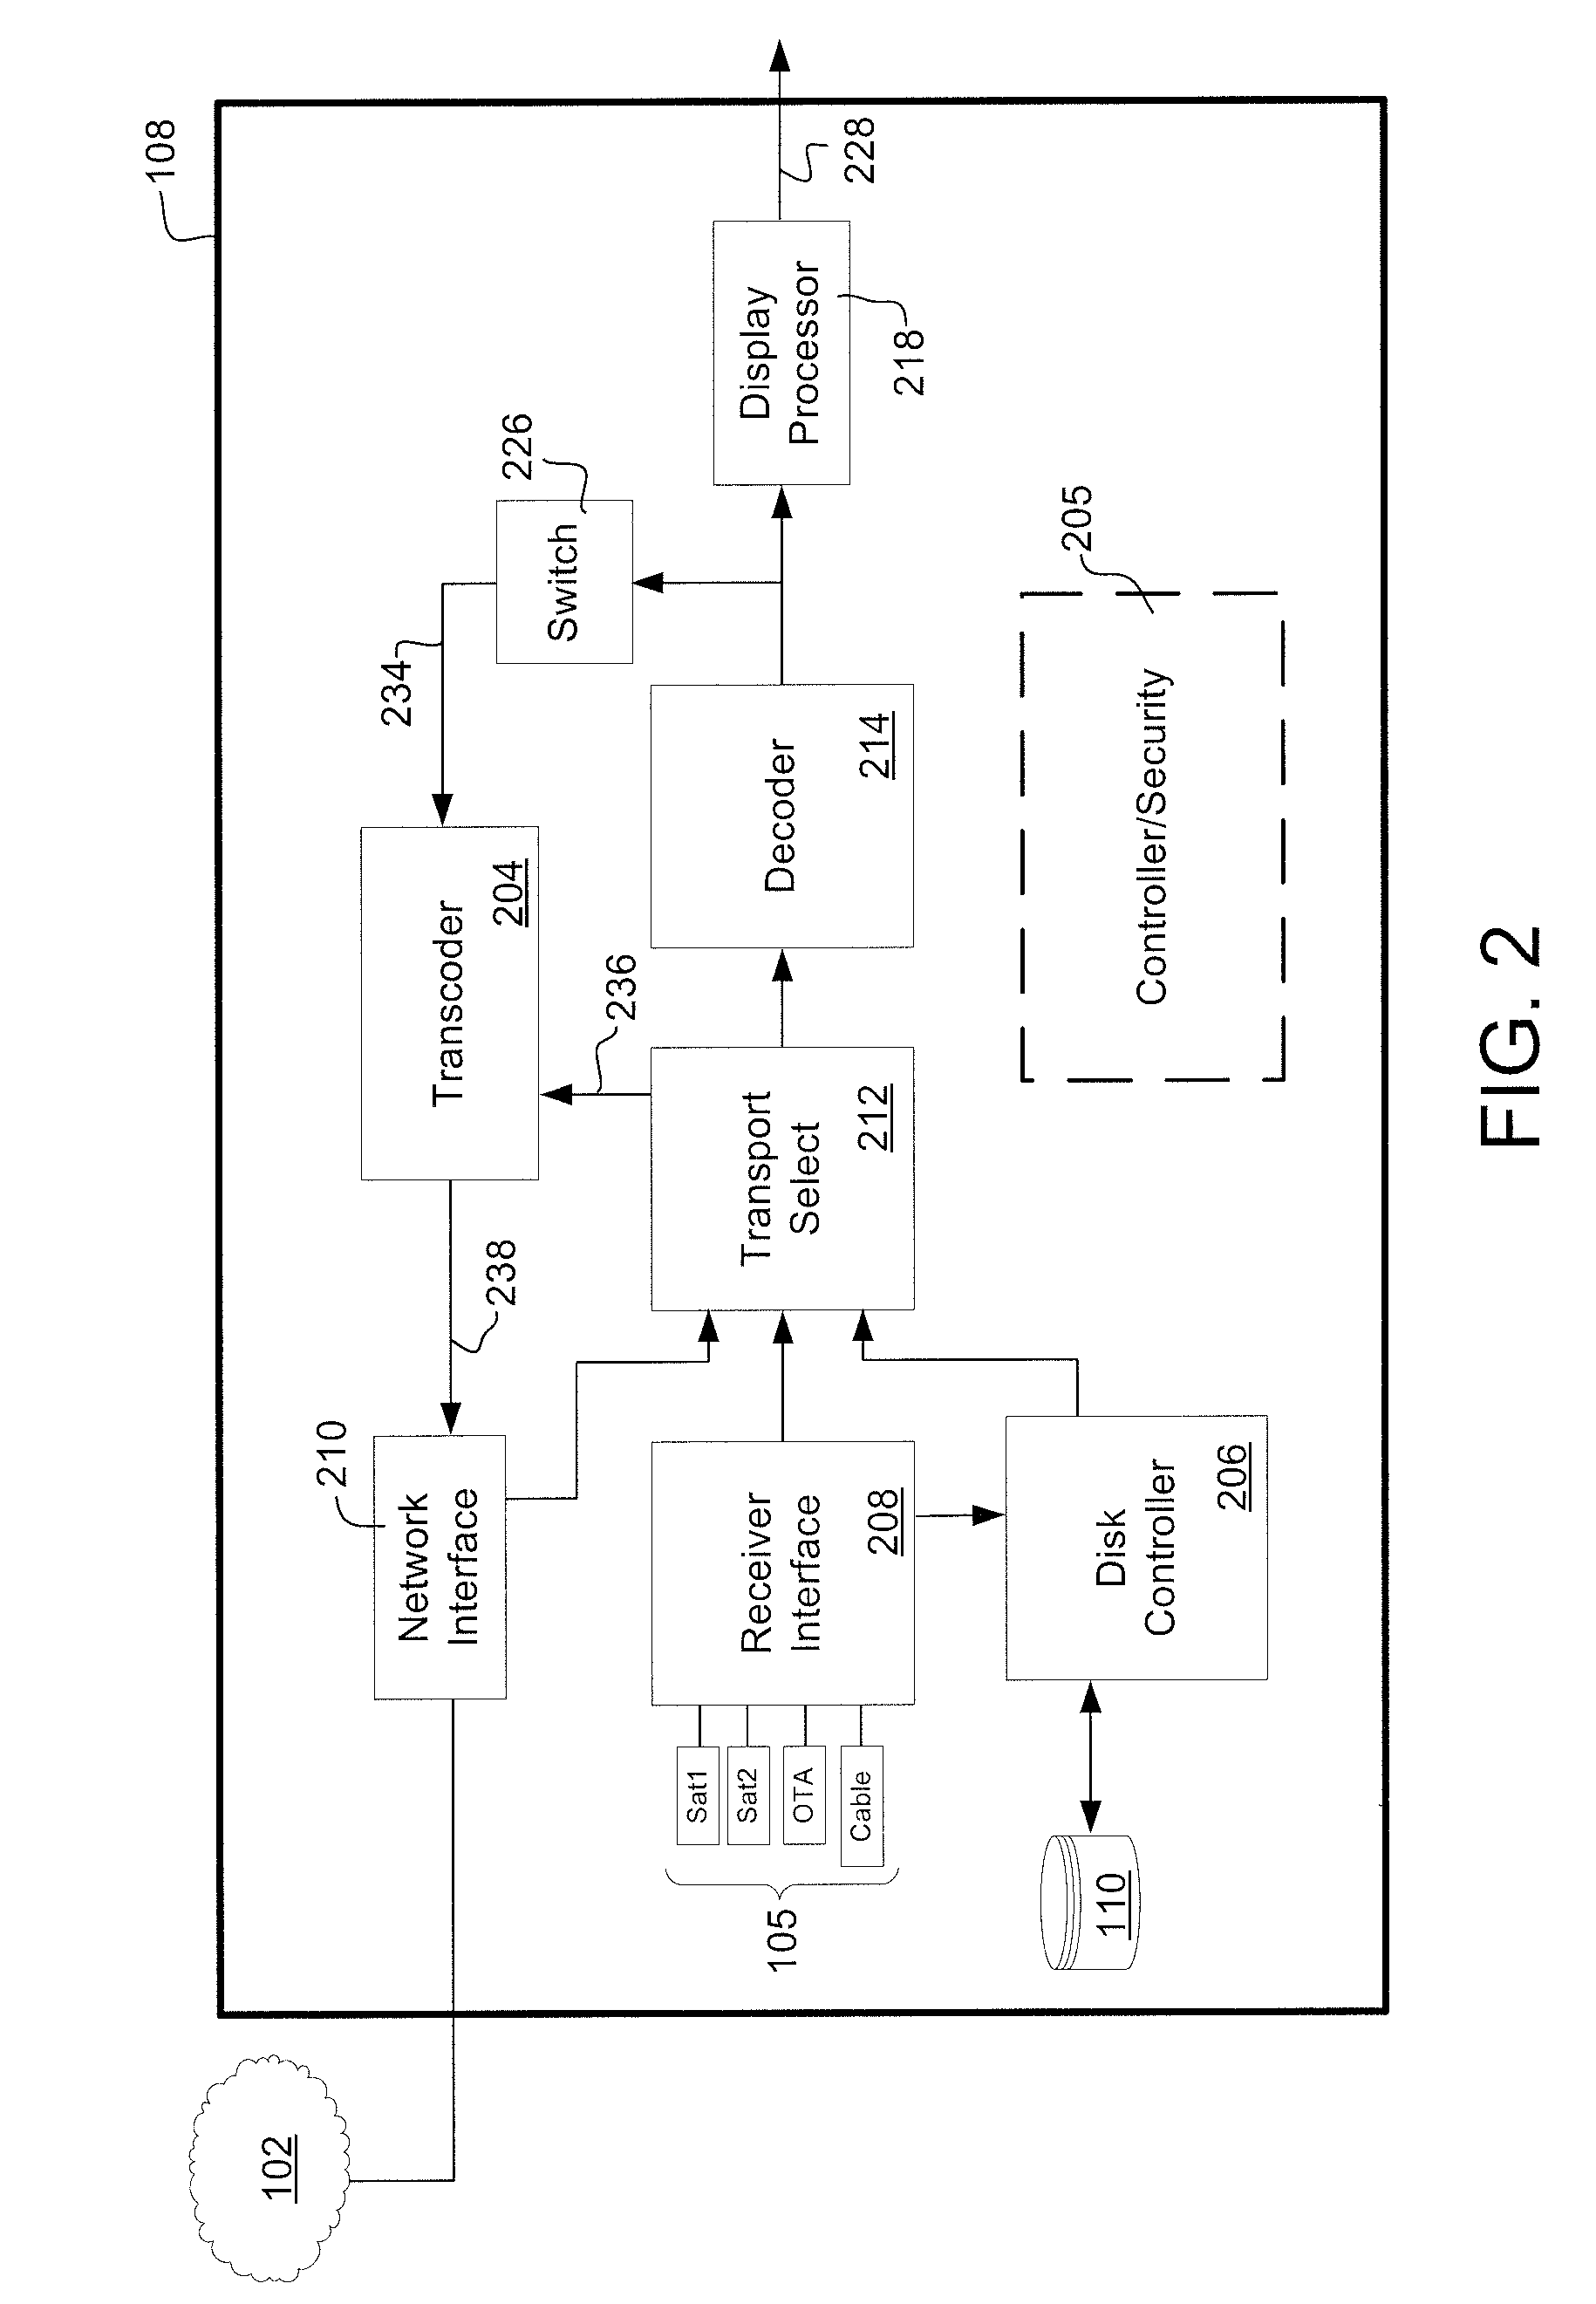 Systems and methods for securely place shifting media content